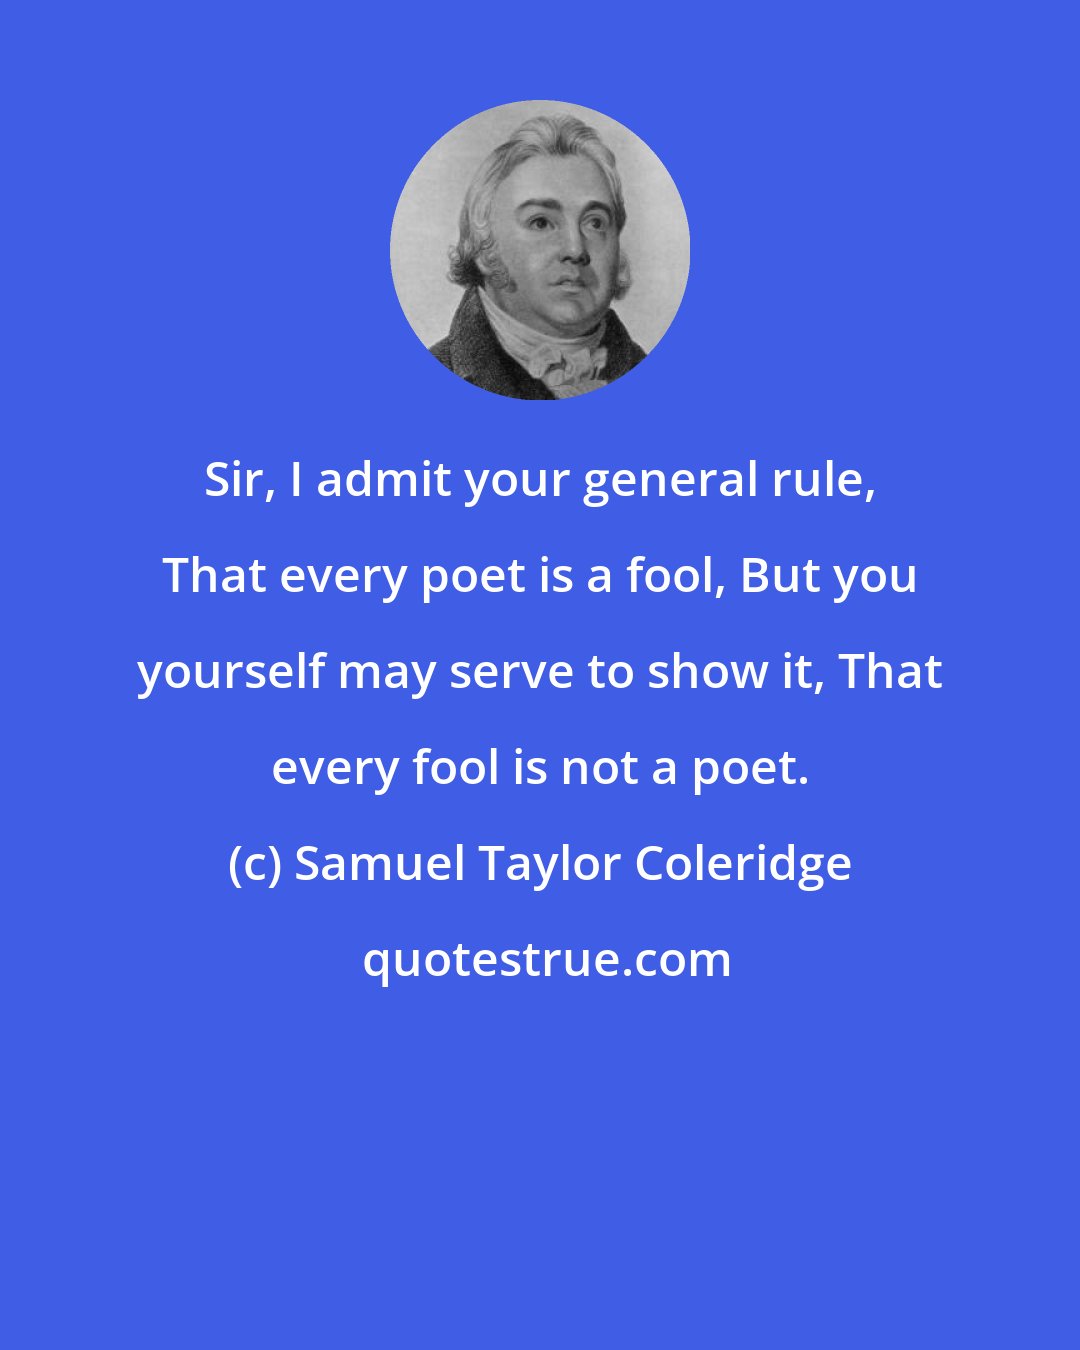 Samuel Taylor Coleridge: Sir, I admit your general rule, That every poet is a fool, But you yourself may serve to show it, That every fool is not a poet.